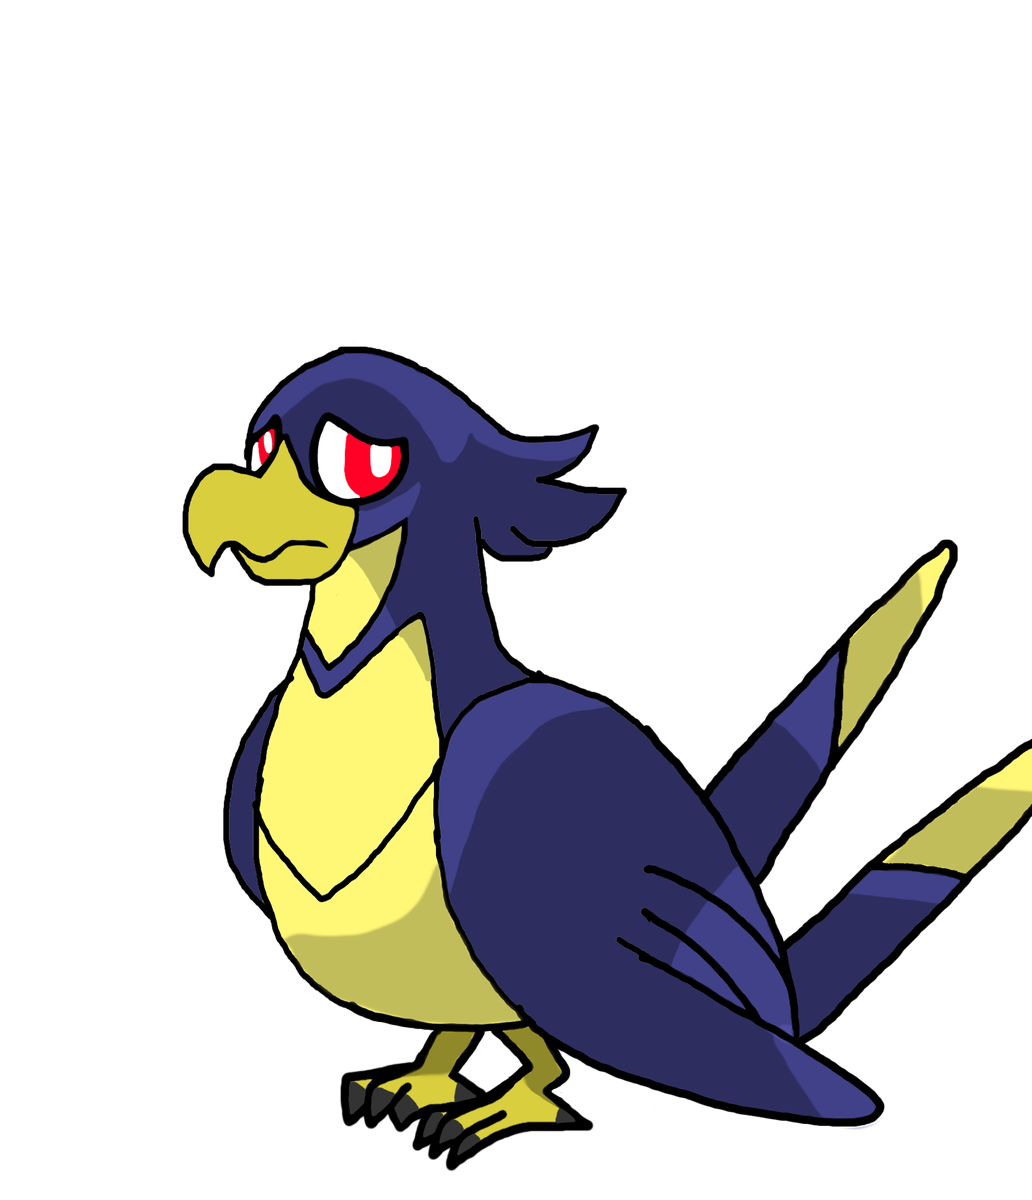 Murkrow Pokemon PNG HD Images